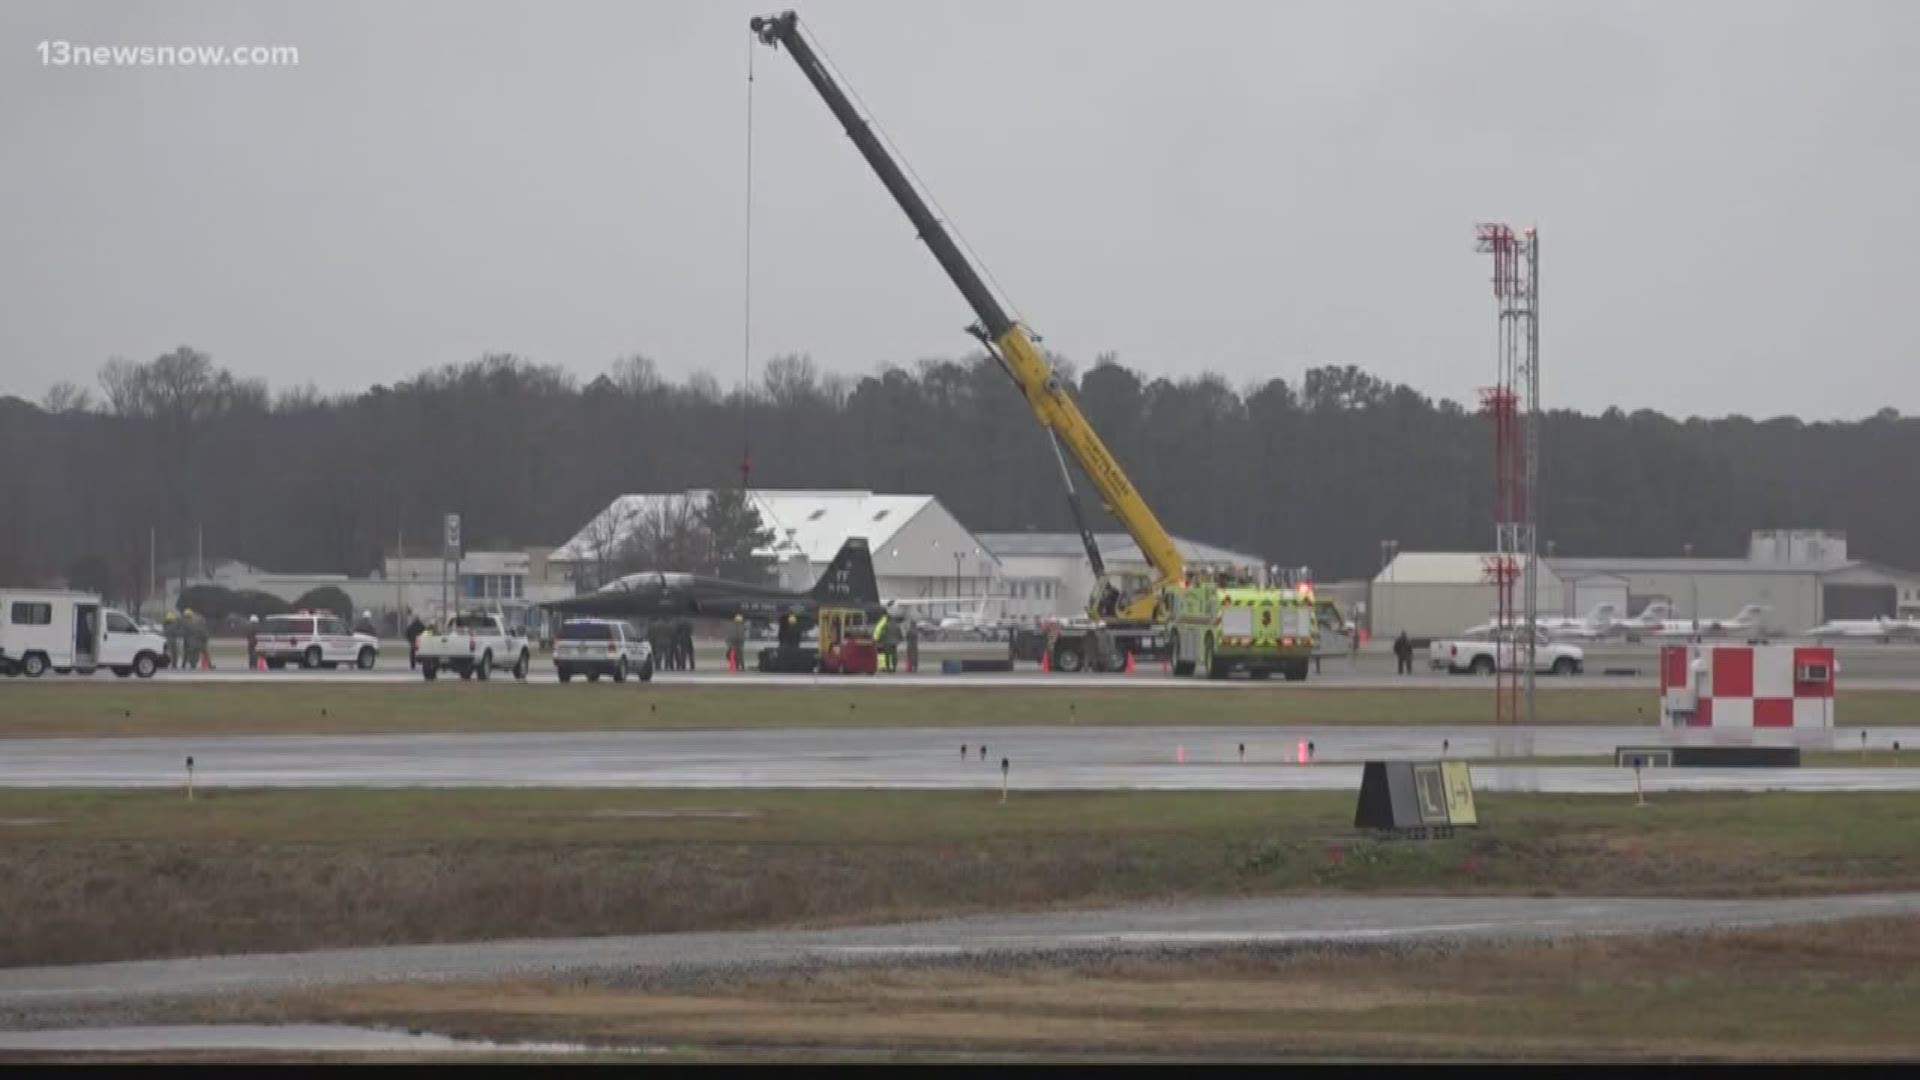 A Langley Airforce Base plane slid off the runway at Newport News Williamsburg International Airport causing delays and cancellations.